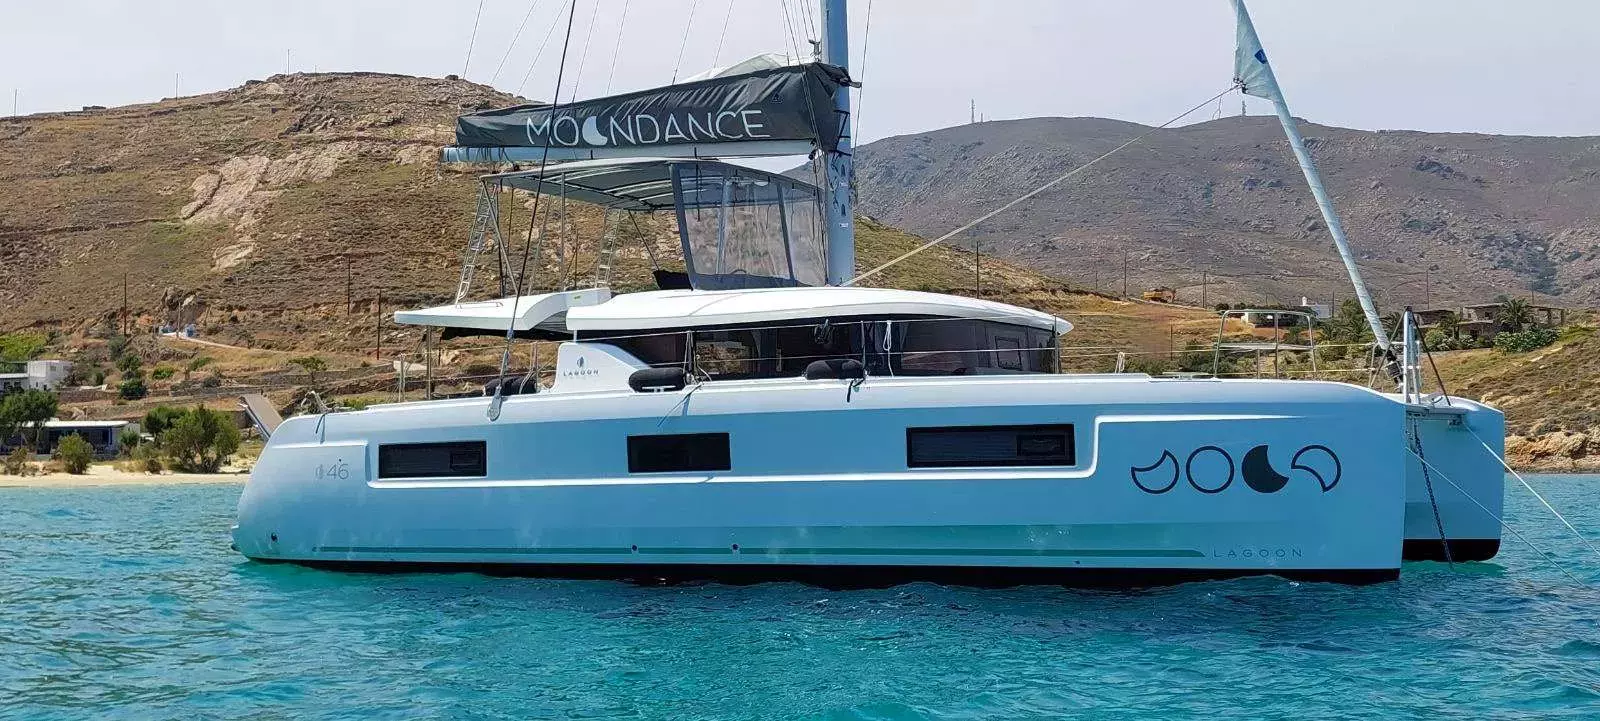 Moondance III by Lagoon - Top rates for a Charter of a private Power Catamaran in Greece